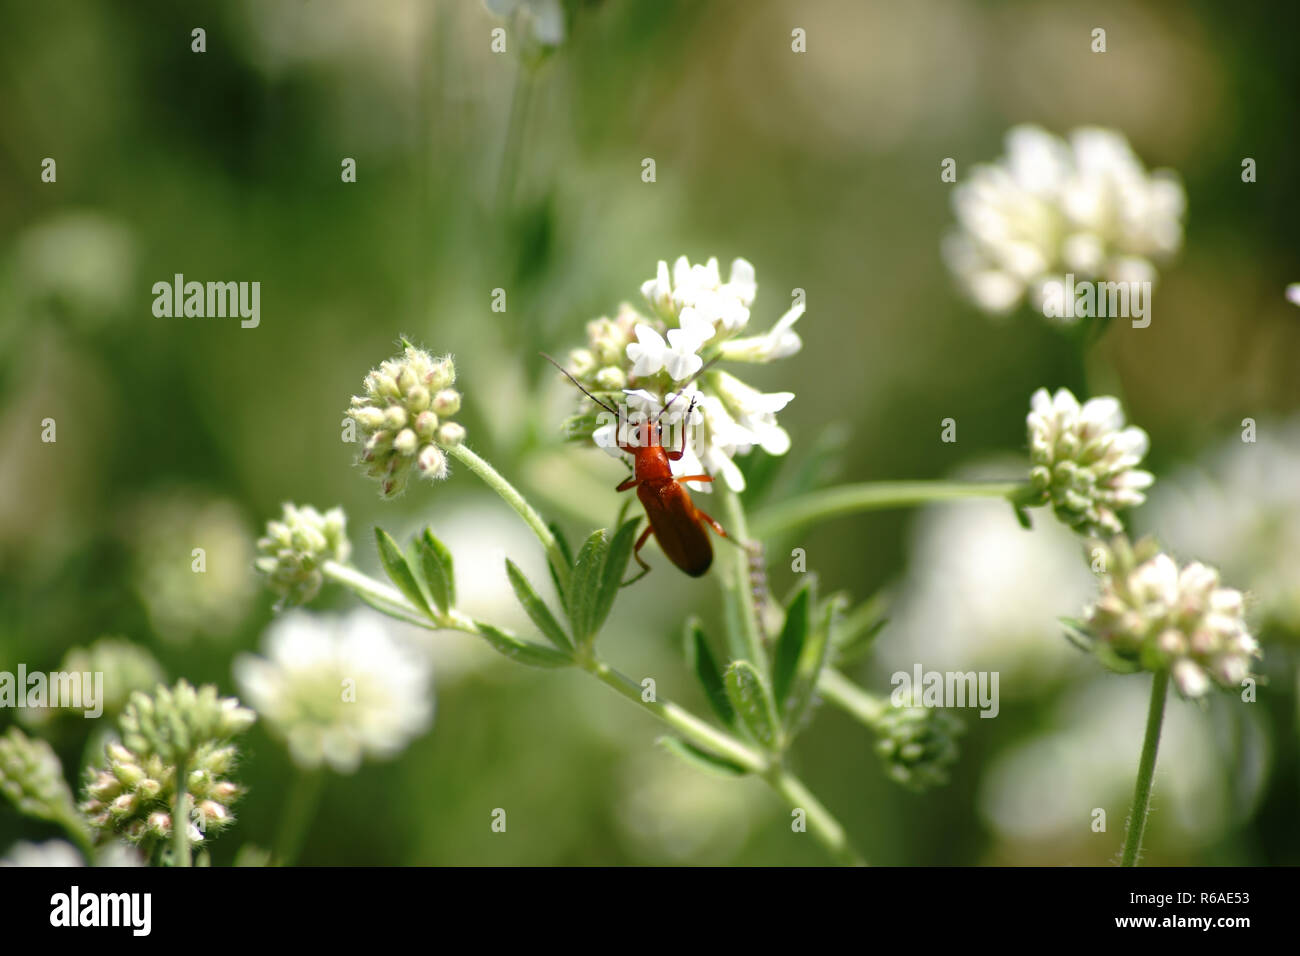 Common Red Soldier Beetle On Dorycnium Stock Photo